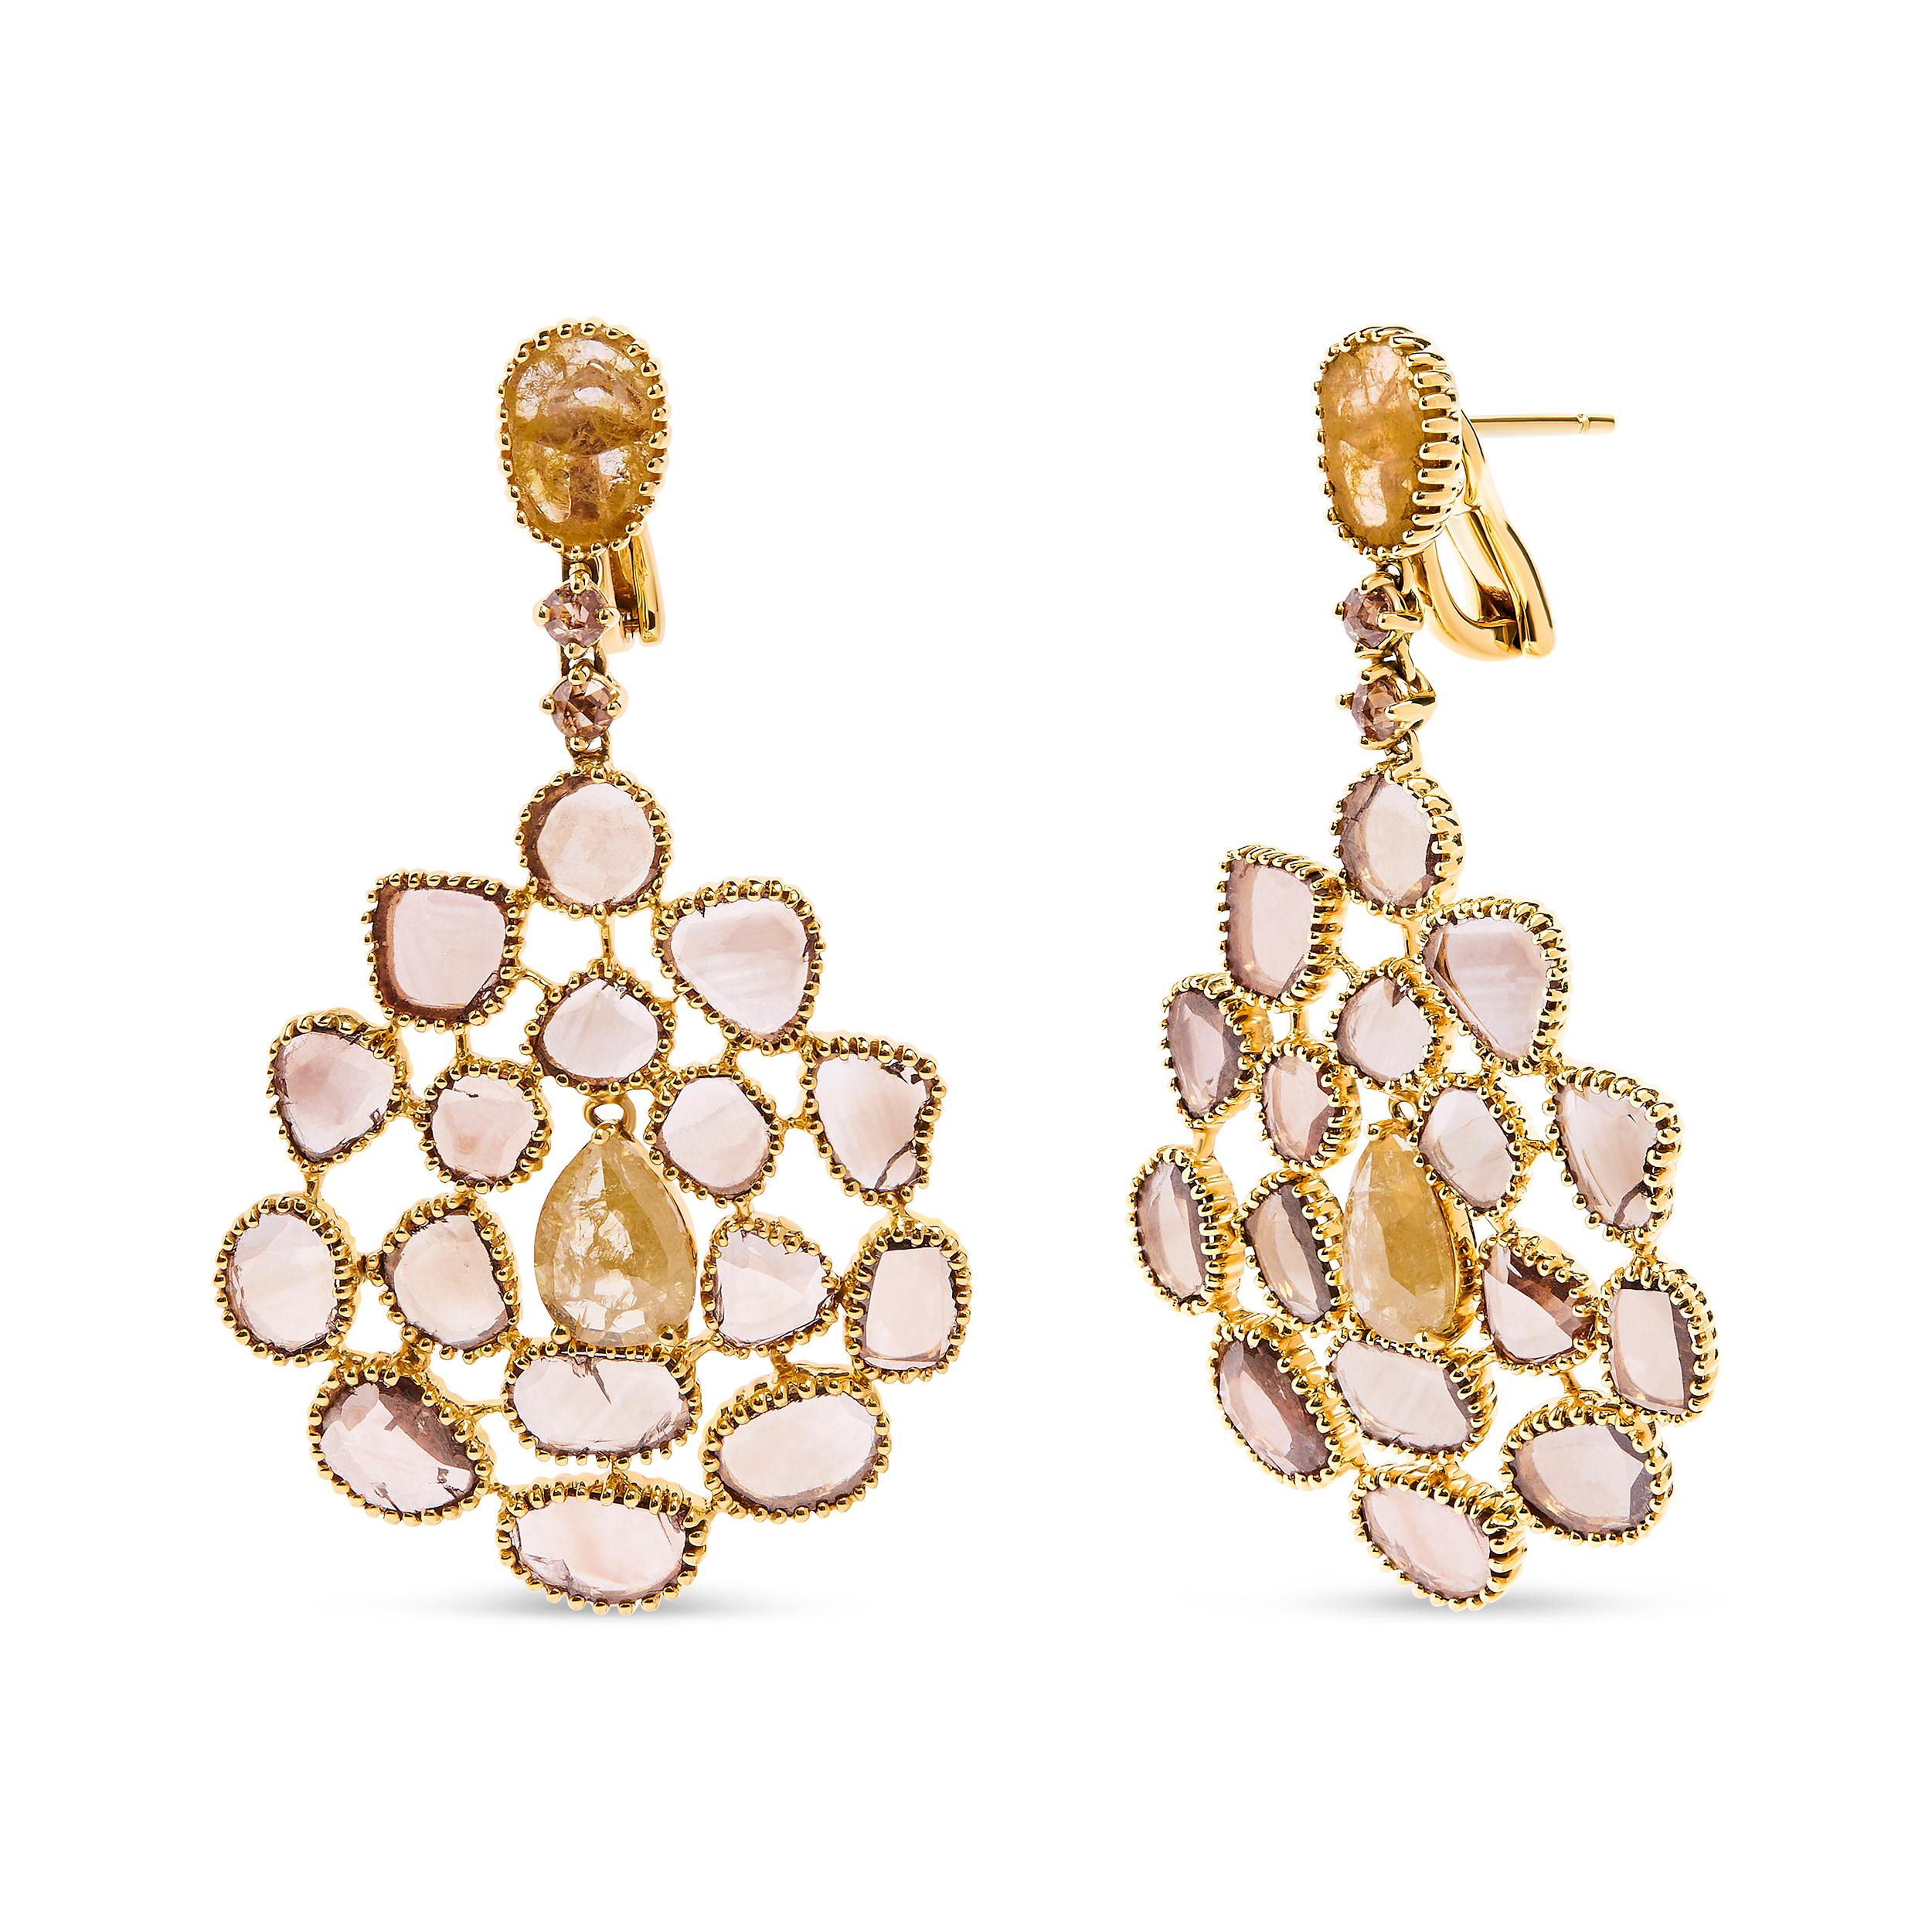 Introducing a mesmerizing masterpiece, these 14K Yellow Gold Chandelier Style Dangle Earrings are a true testament to elegance and grace. Adorned with a breathtaking total weight of 11 1/5 carats, these earrings feature 40 natural, fancy color